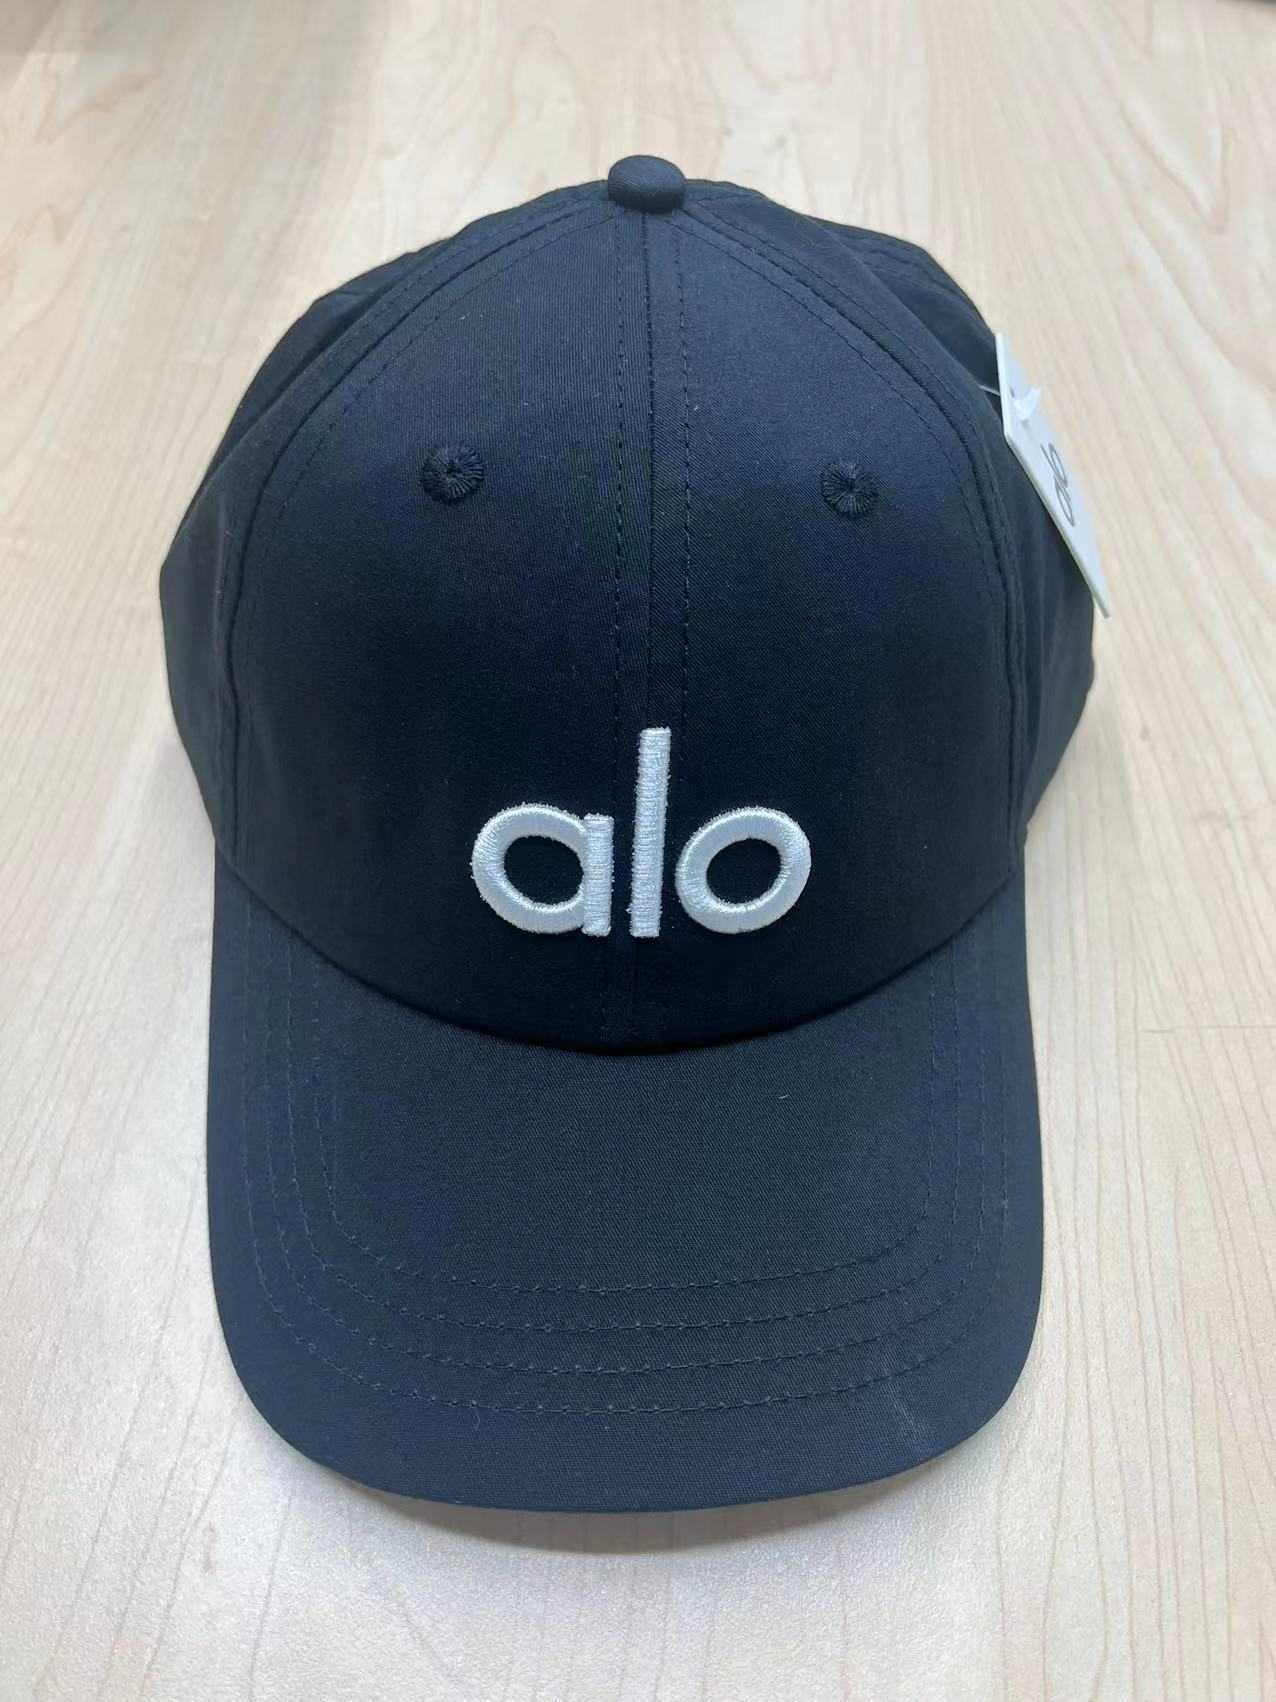 

Designer Hats Alo Yoga Cap For Men And Women's Large Cap Shows Small Face Versatile Baseball Cap Outdoor Sports Trend Sunscreen Hat Balck Fashion, Pink embroidery